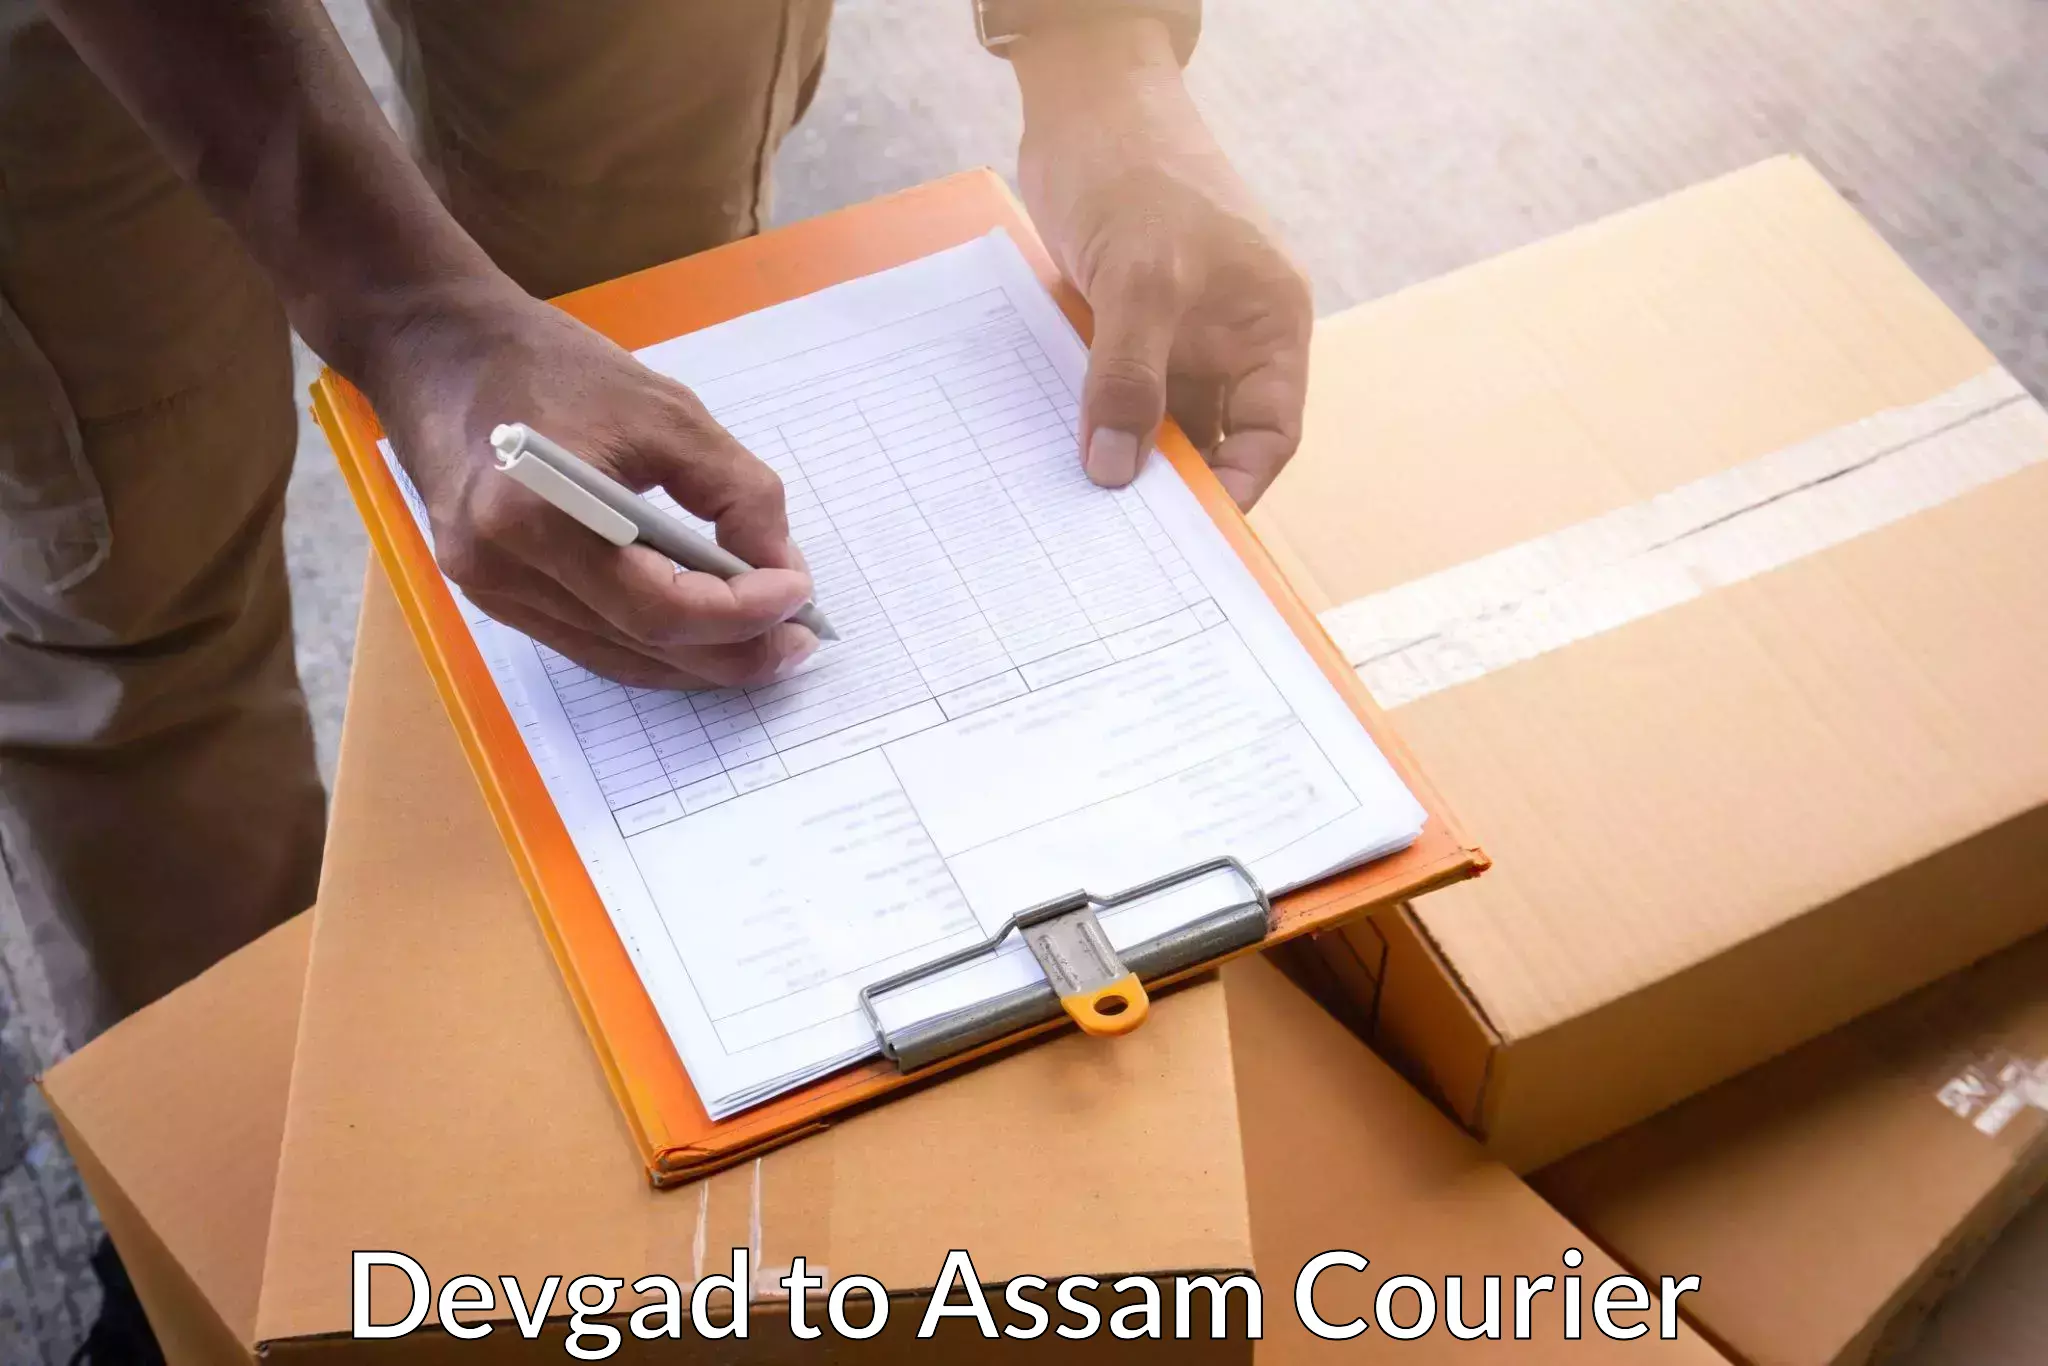 Courier rate comparison in Devgad to Rowta